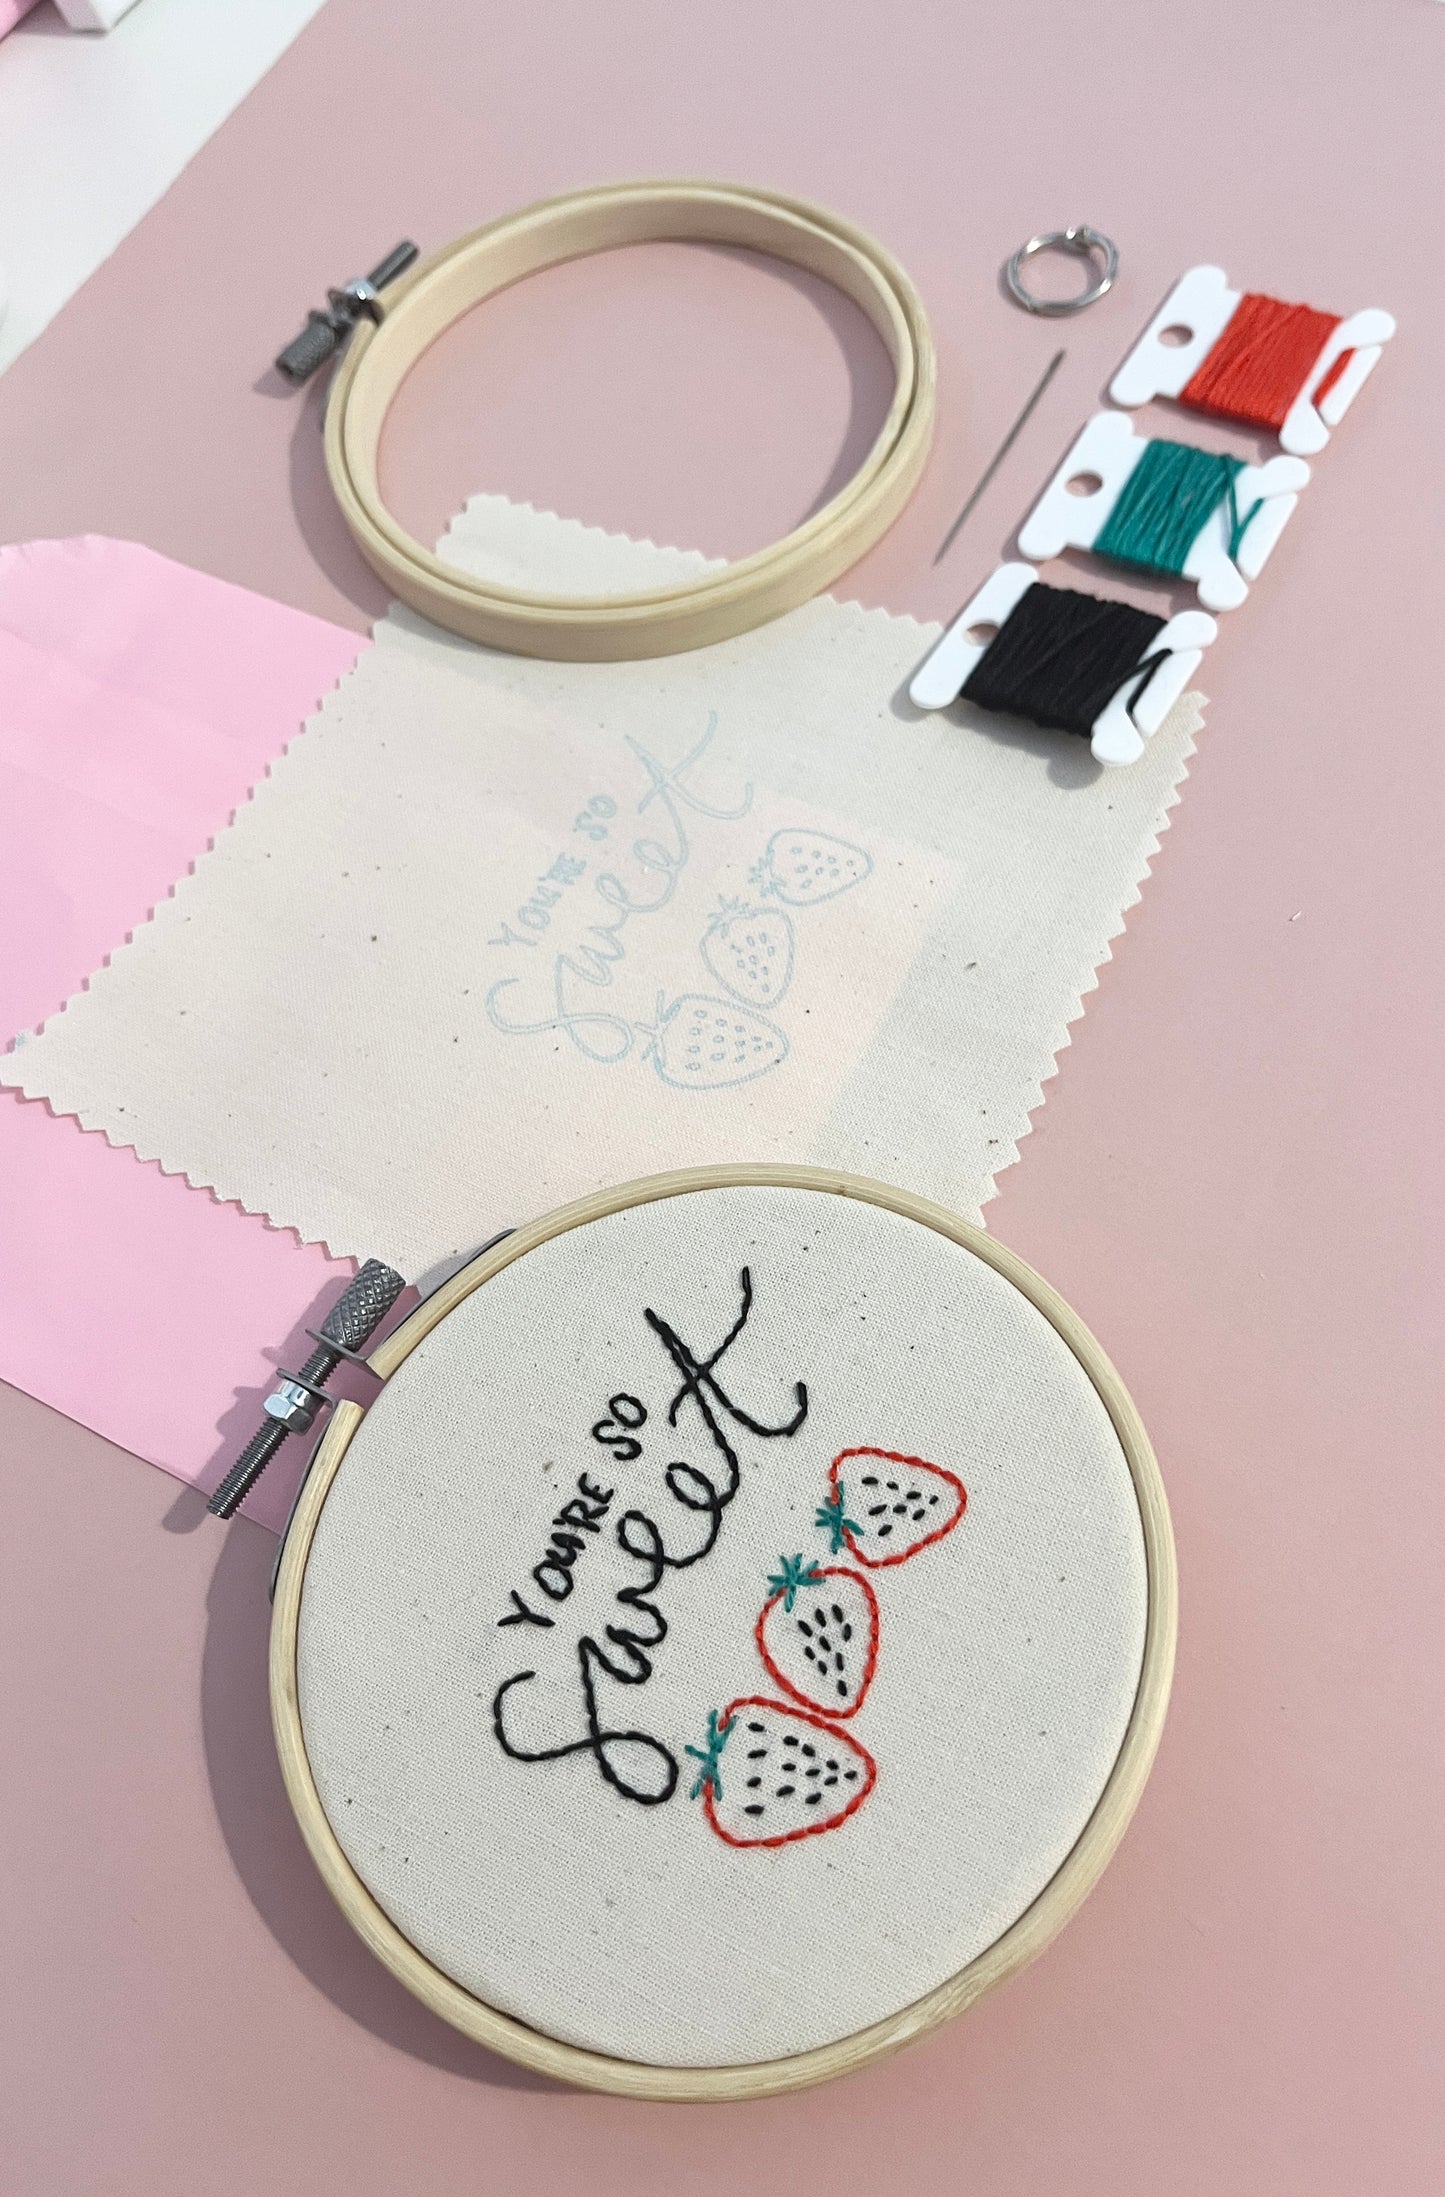 "You're So Sweet" Strawberry Embroidery Kit